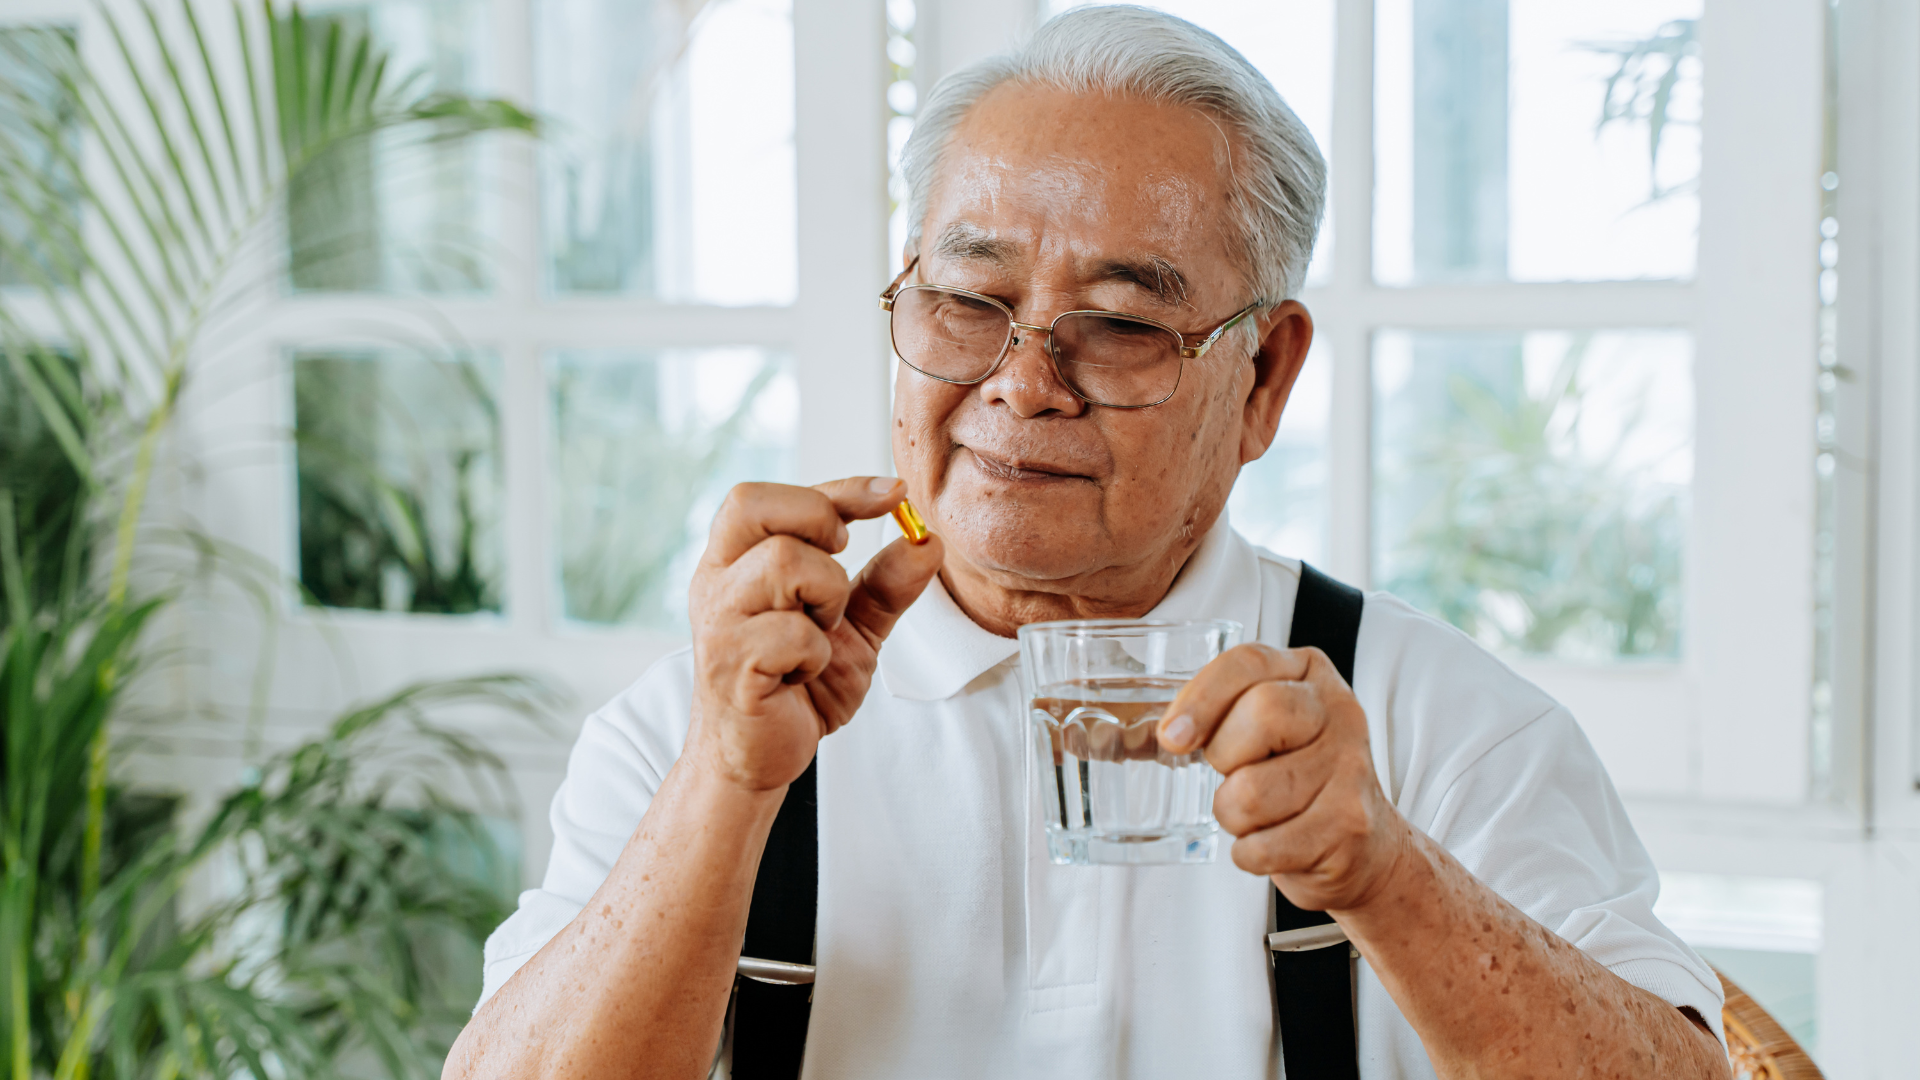 Care home resident confidently removes his pill from medication packaging and gets ready to take it